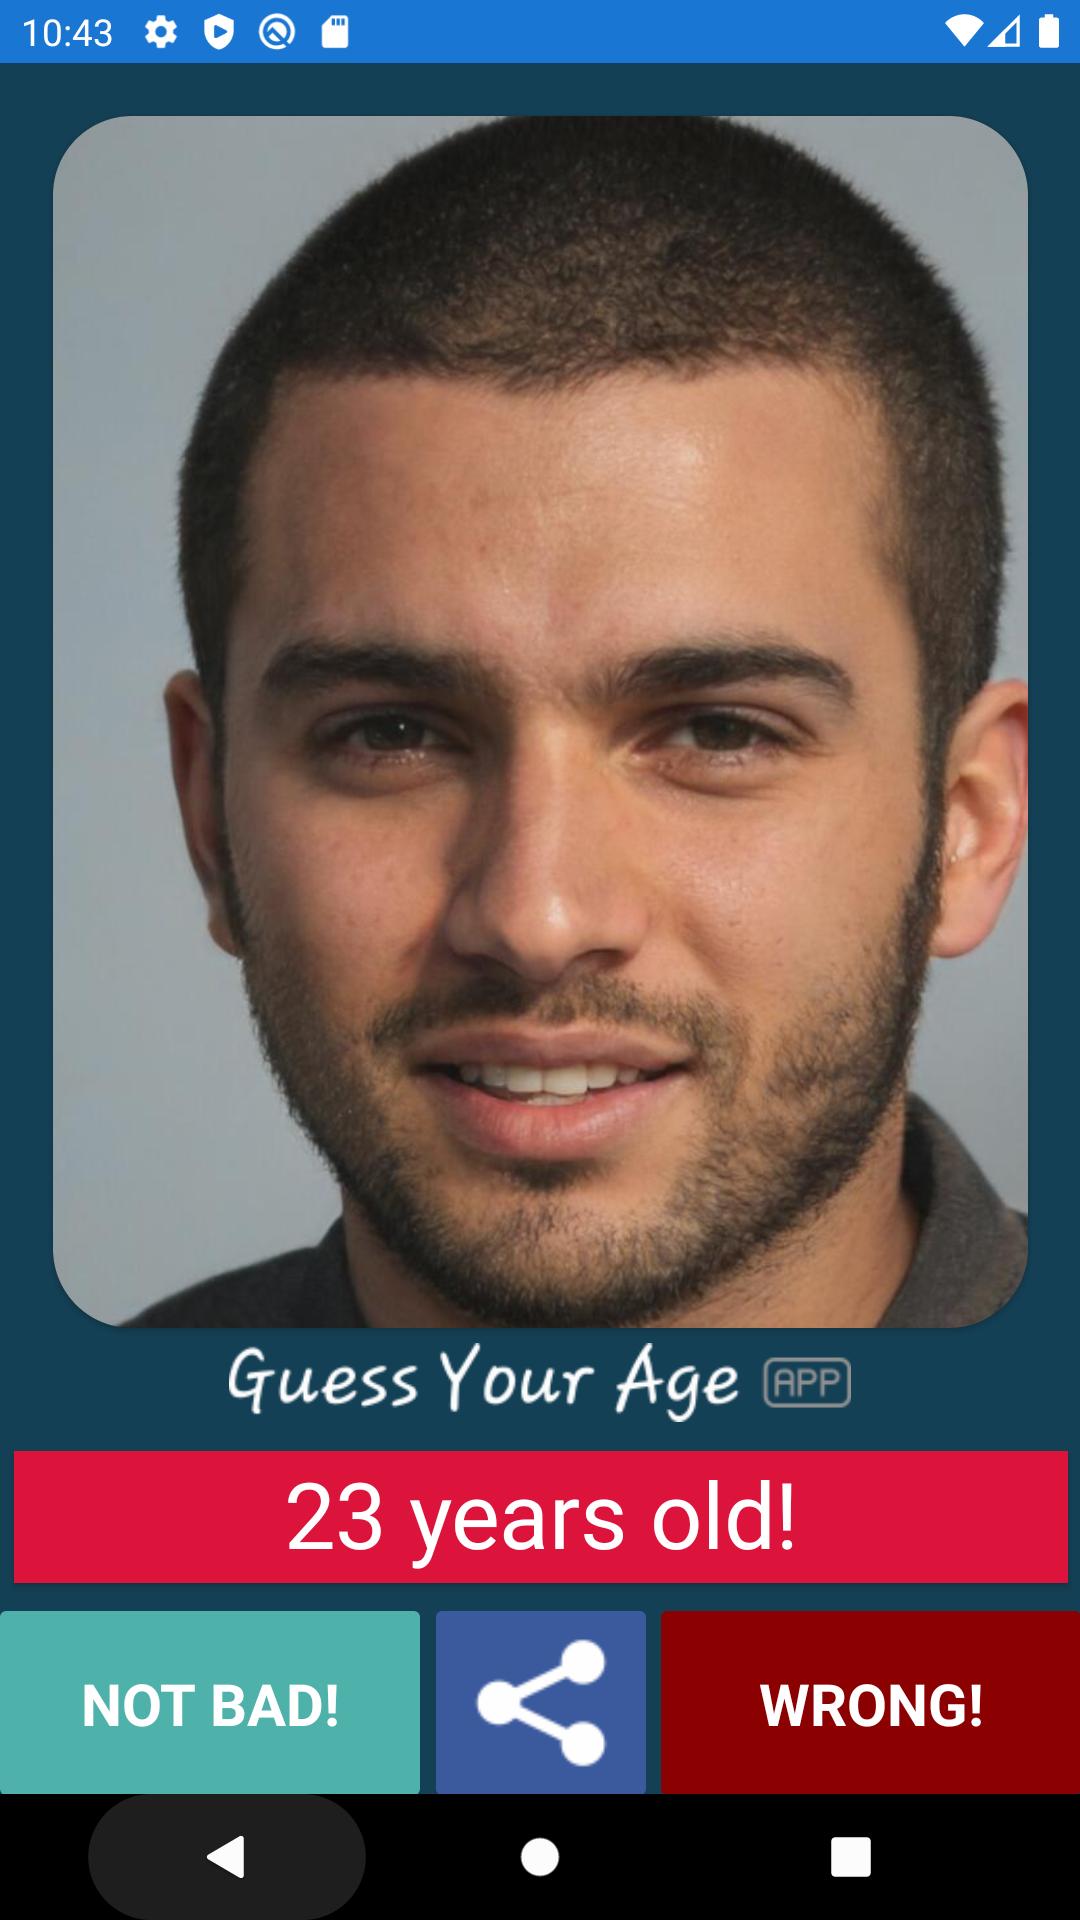 Guess Your Age for Android - APK Download